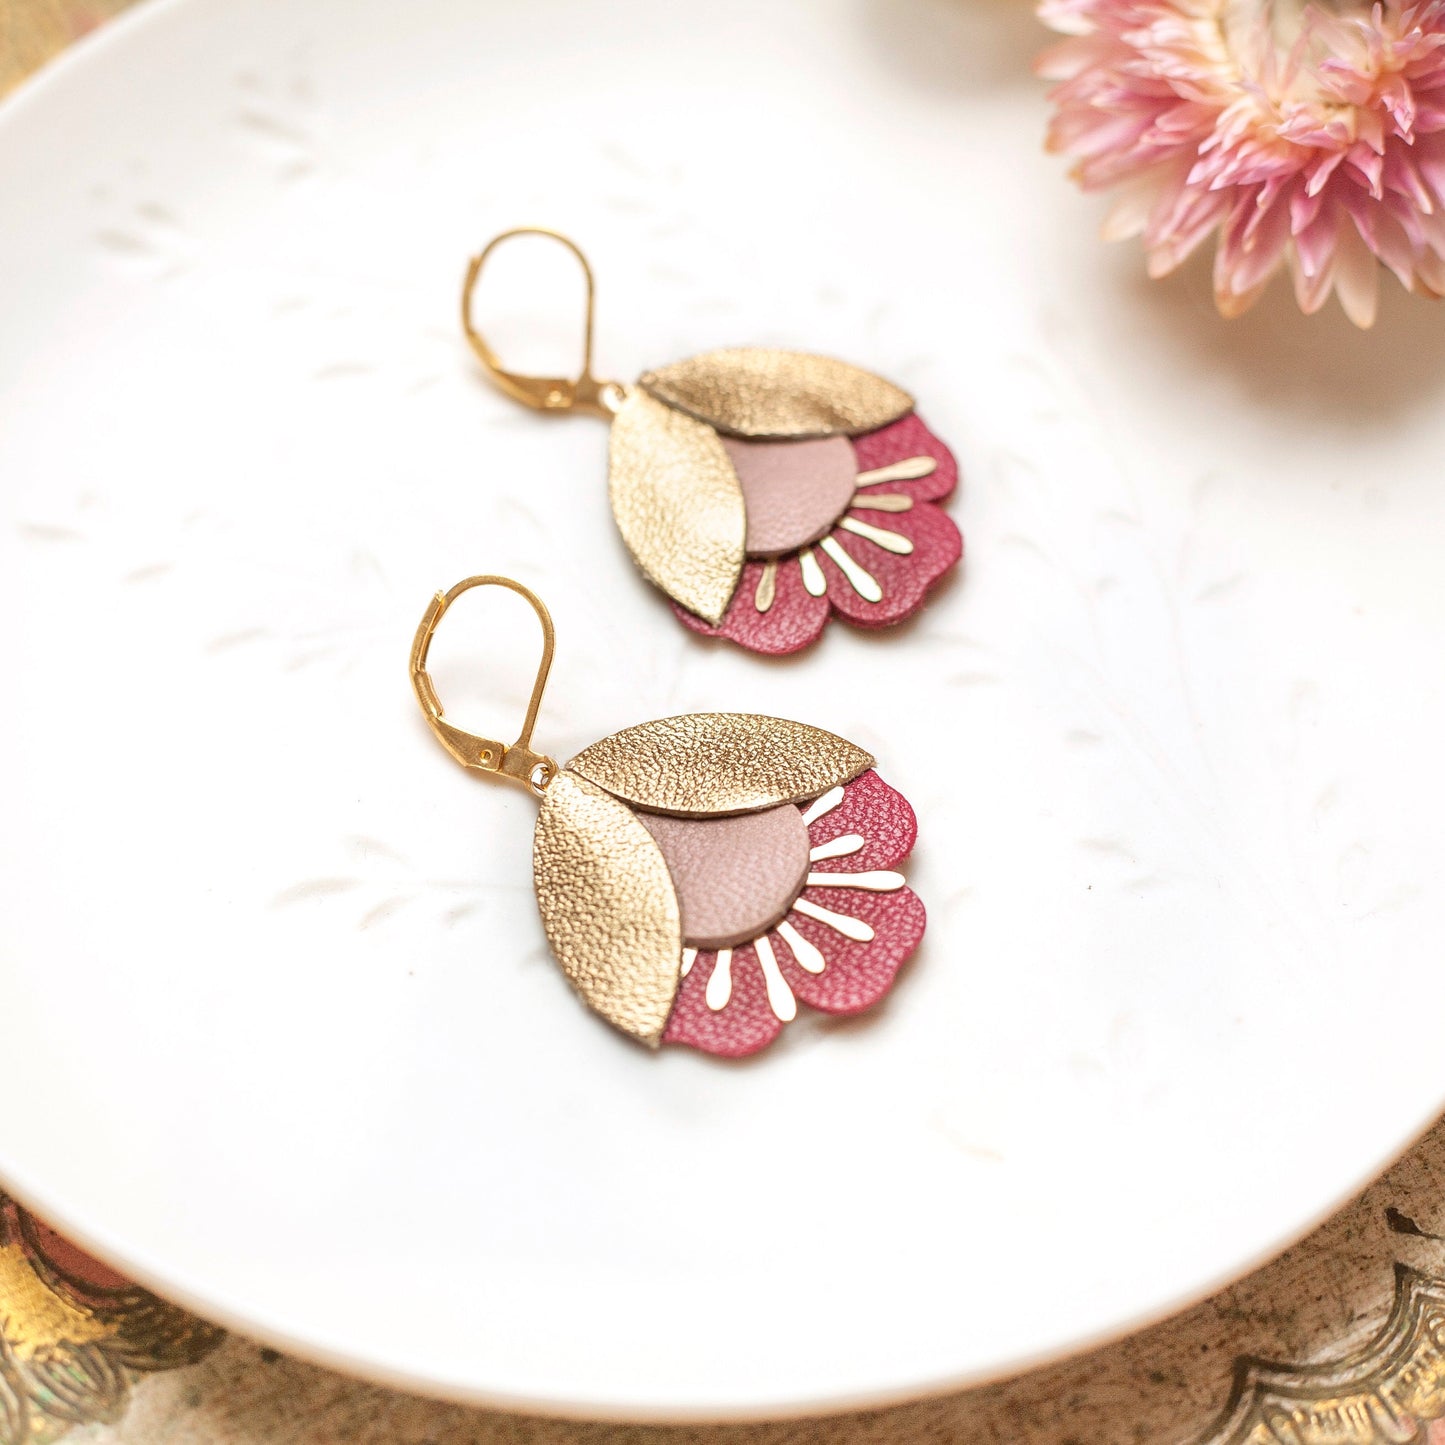 Cherry blossom earrings in pink and plum gold leather